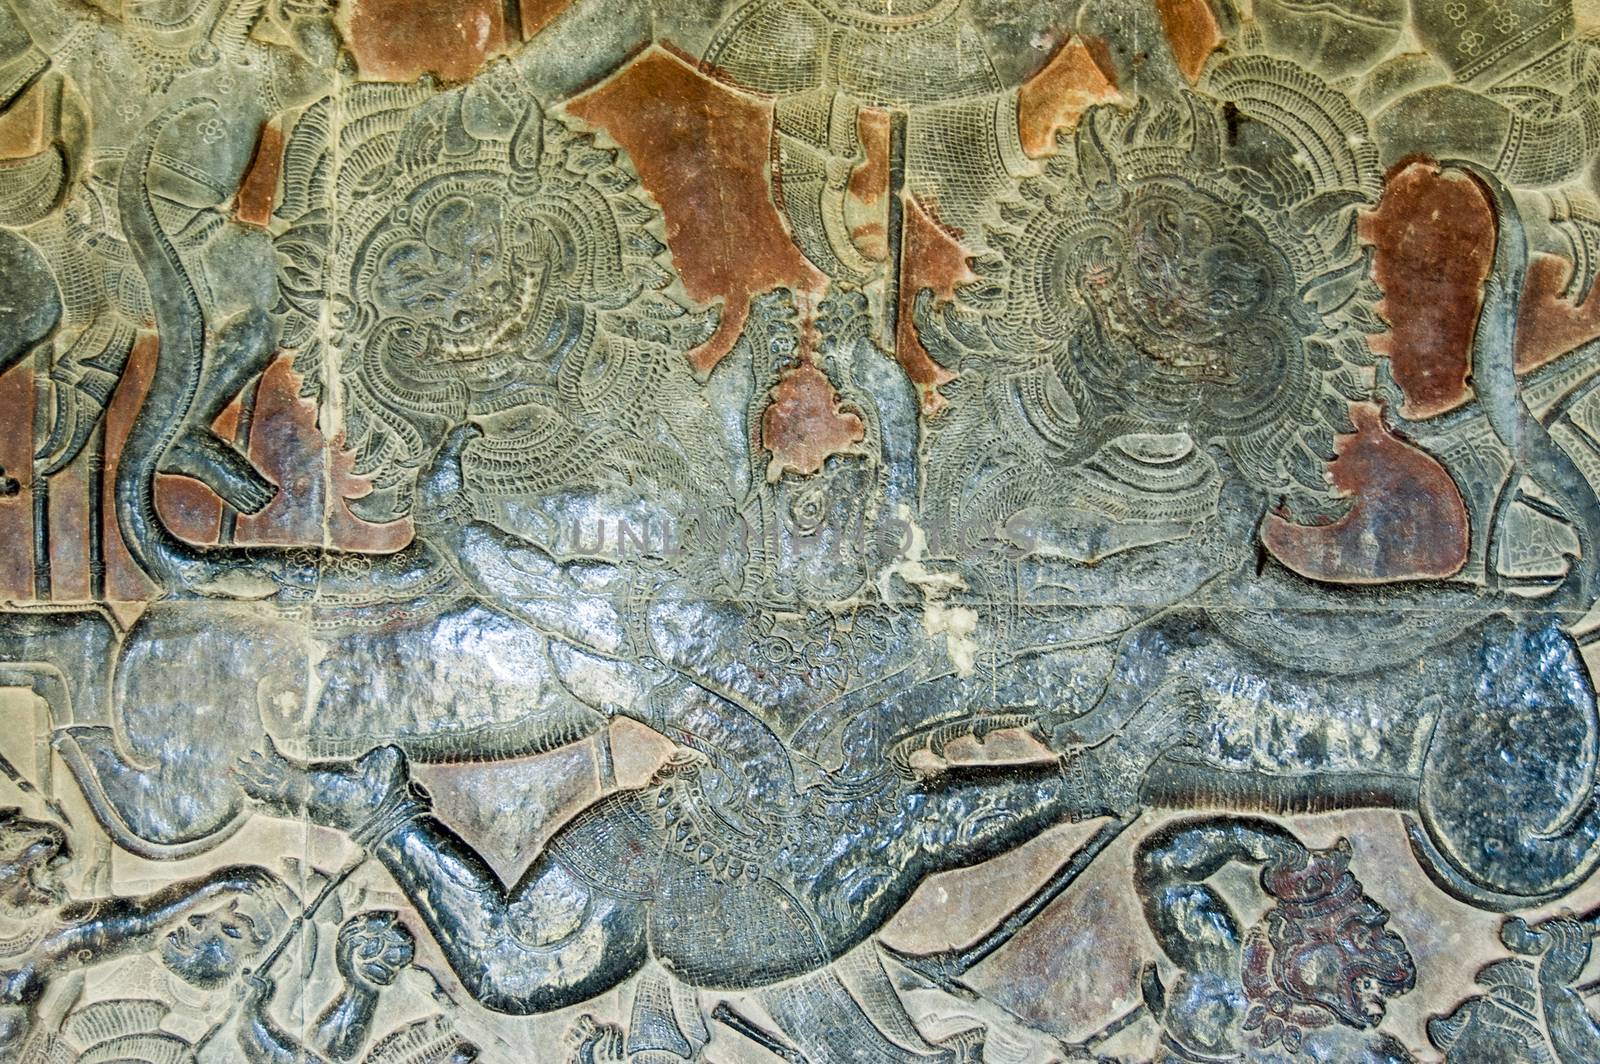 The Hindu monkey god Hanuman fighting two imperial lions in the Battle of Lanka. Wall of Angkor Wat temple, Angkor, Siem Reap, Cambodia.